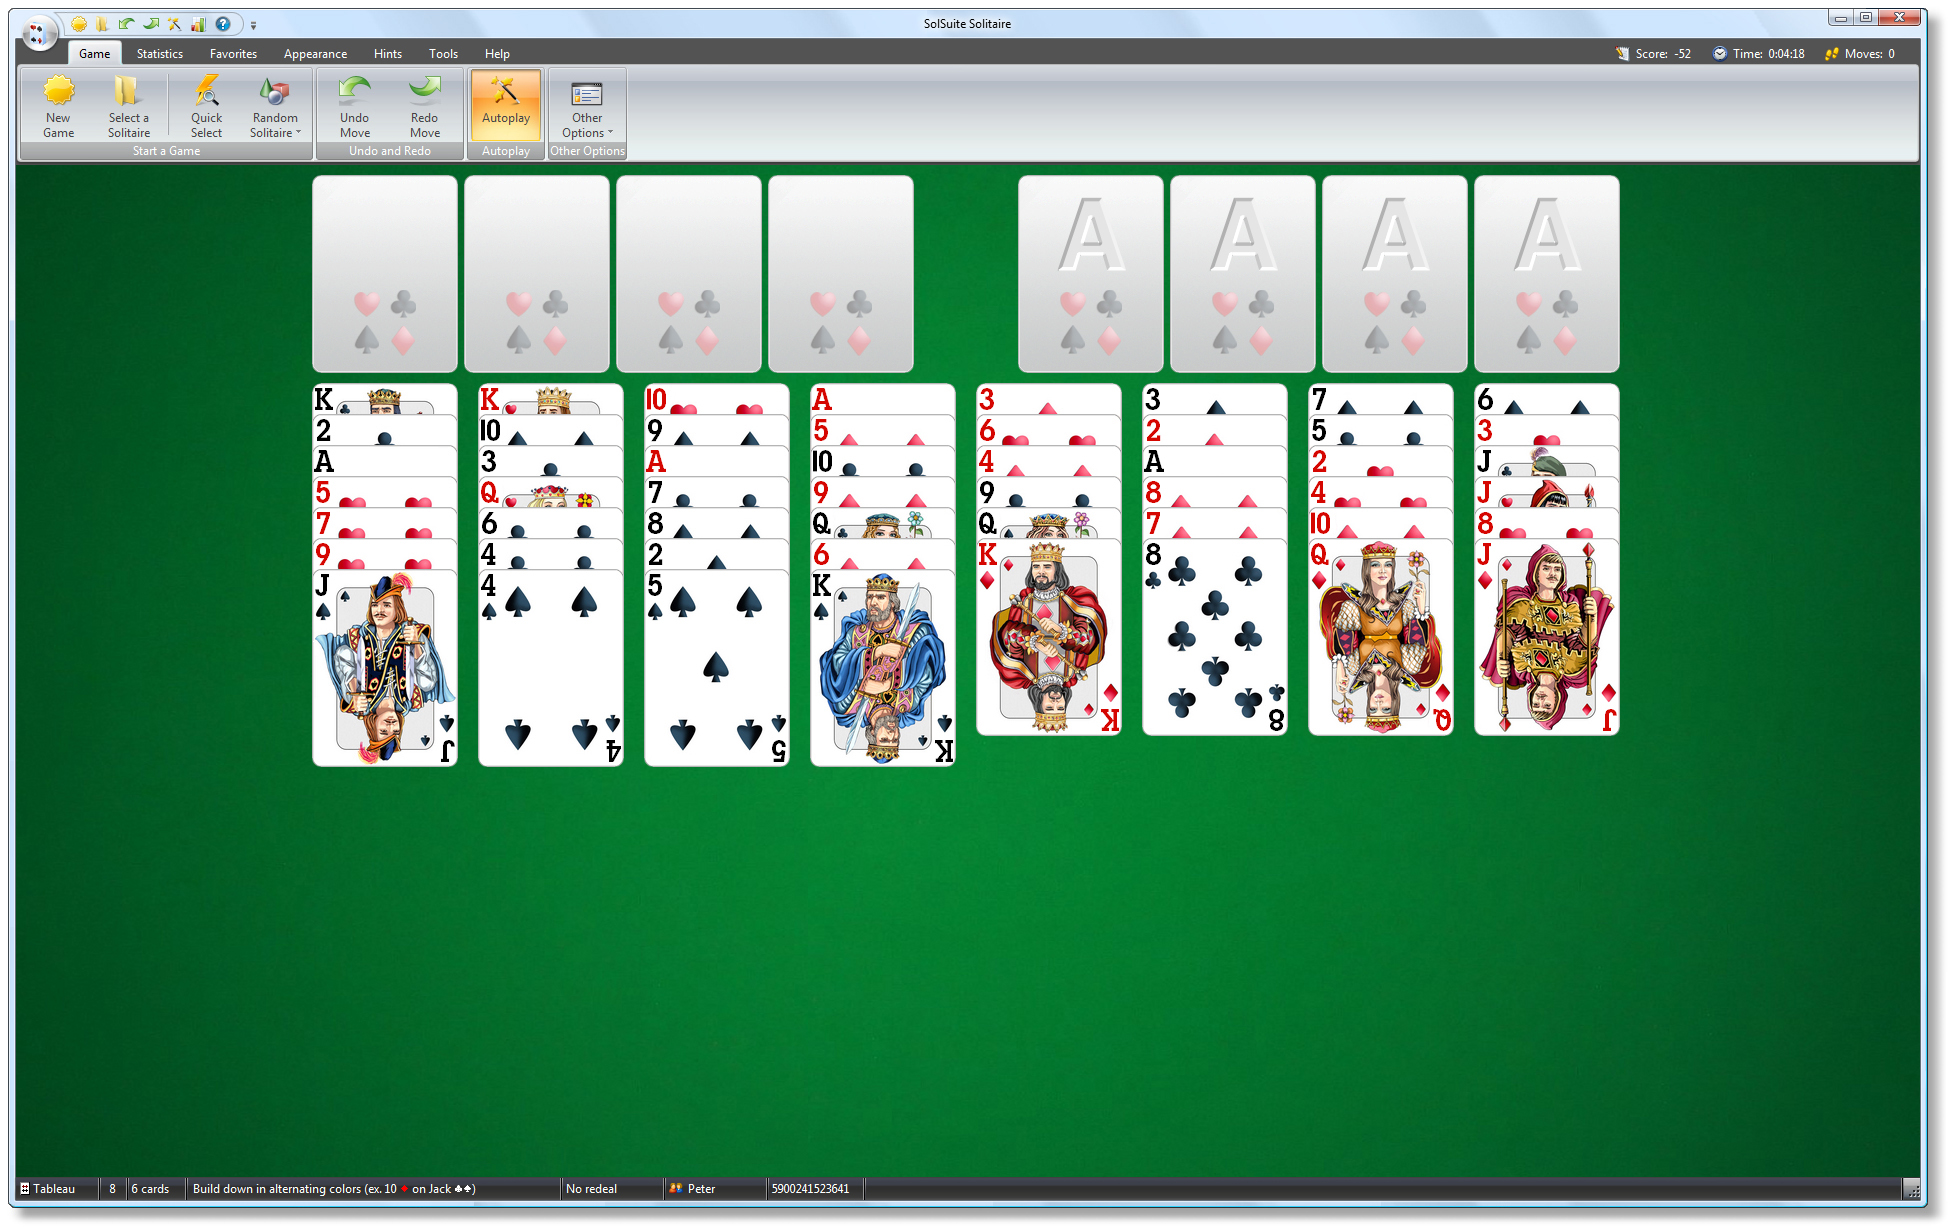 SolSuite Solitaire - FreeCell screenshot 1920x1200